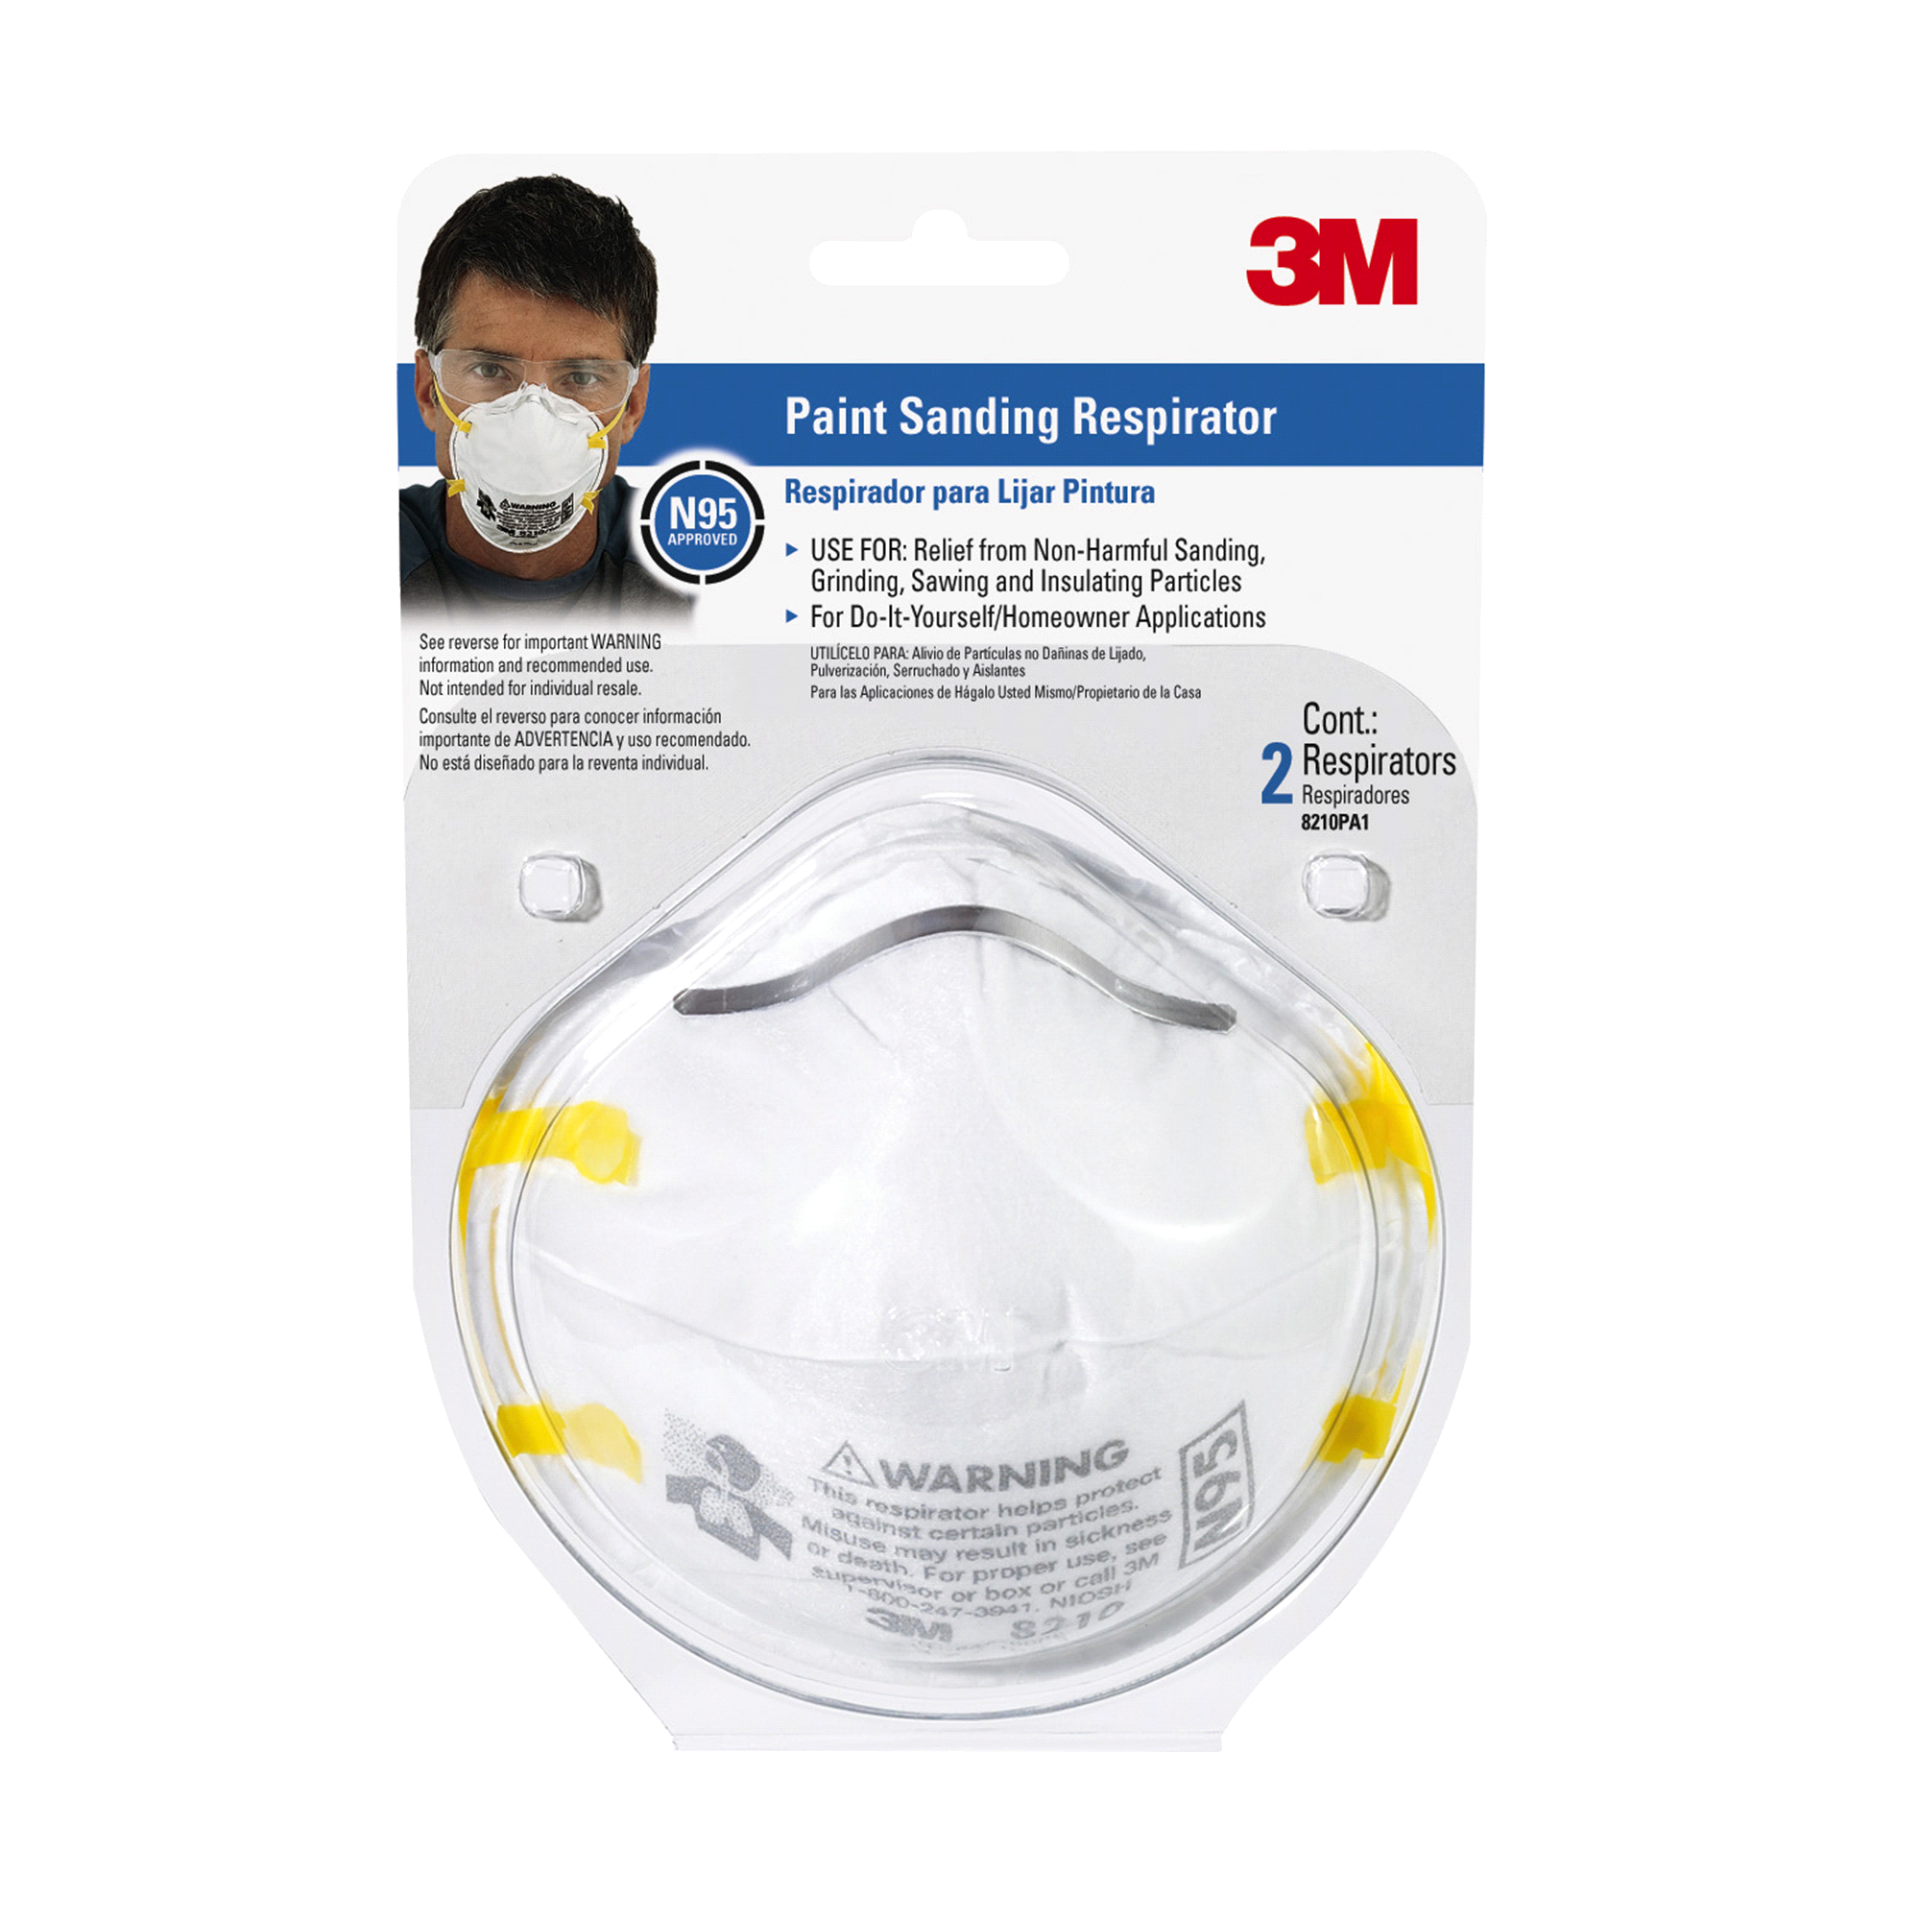 slide 1 of 1, 3M Paint Sanding Respirator, 2 each/pack; for non-harmful dusts from sanding, grinding, sawing and insulating particles., 2 ct